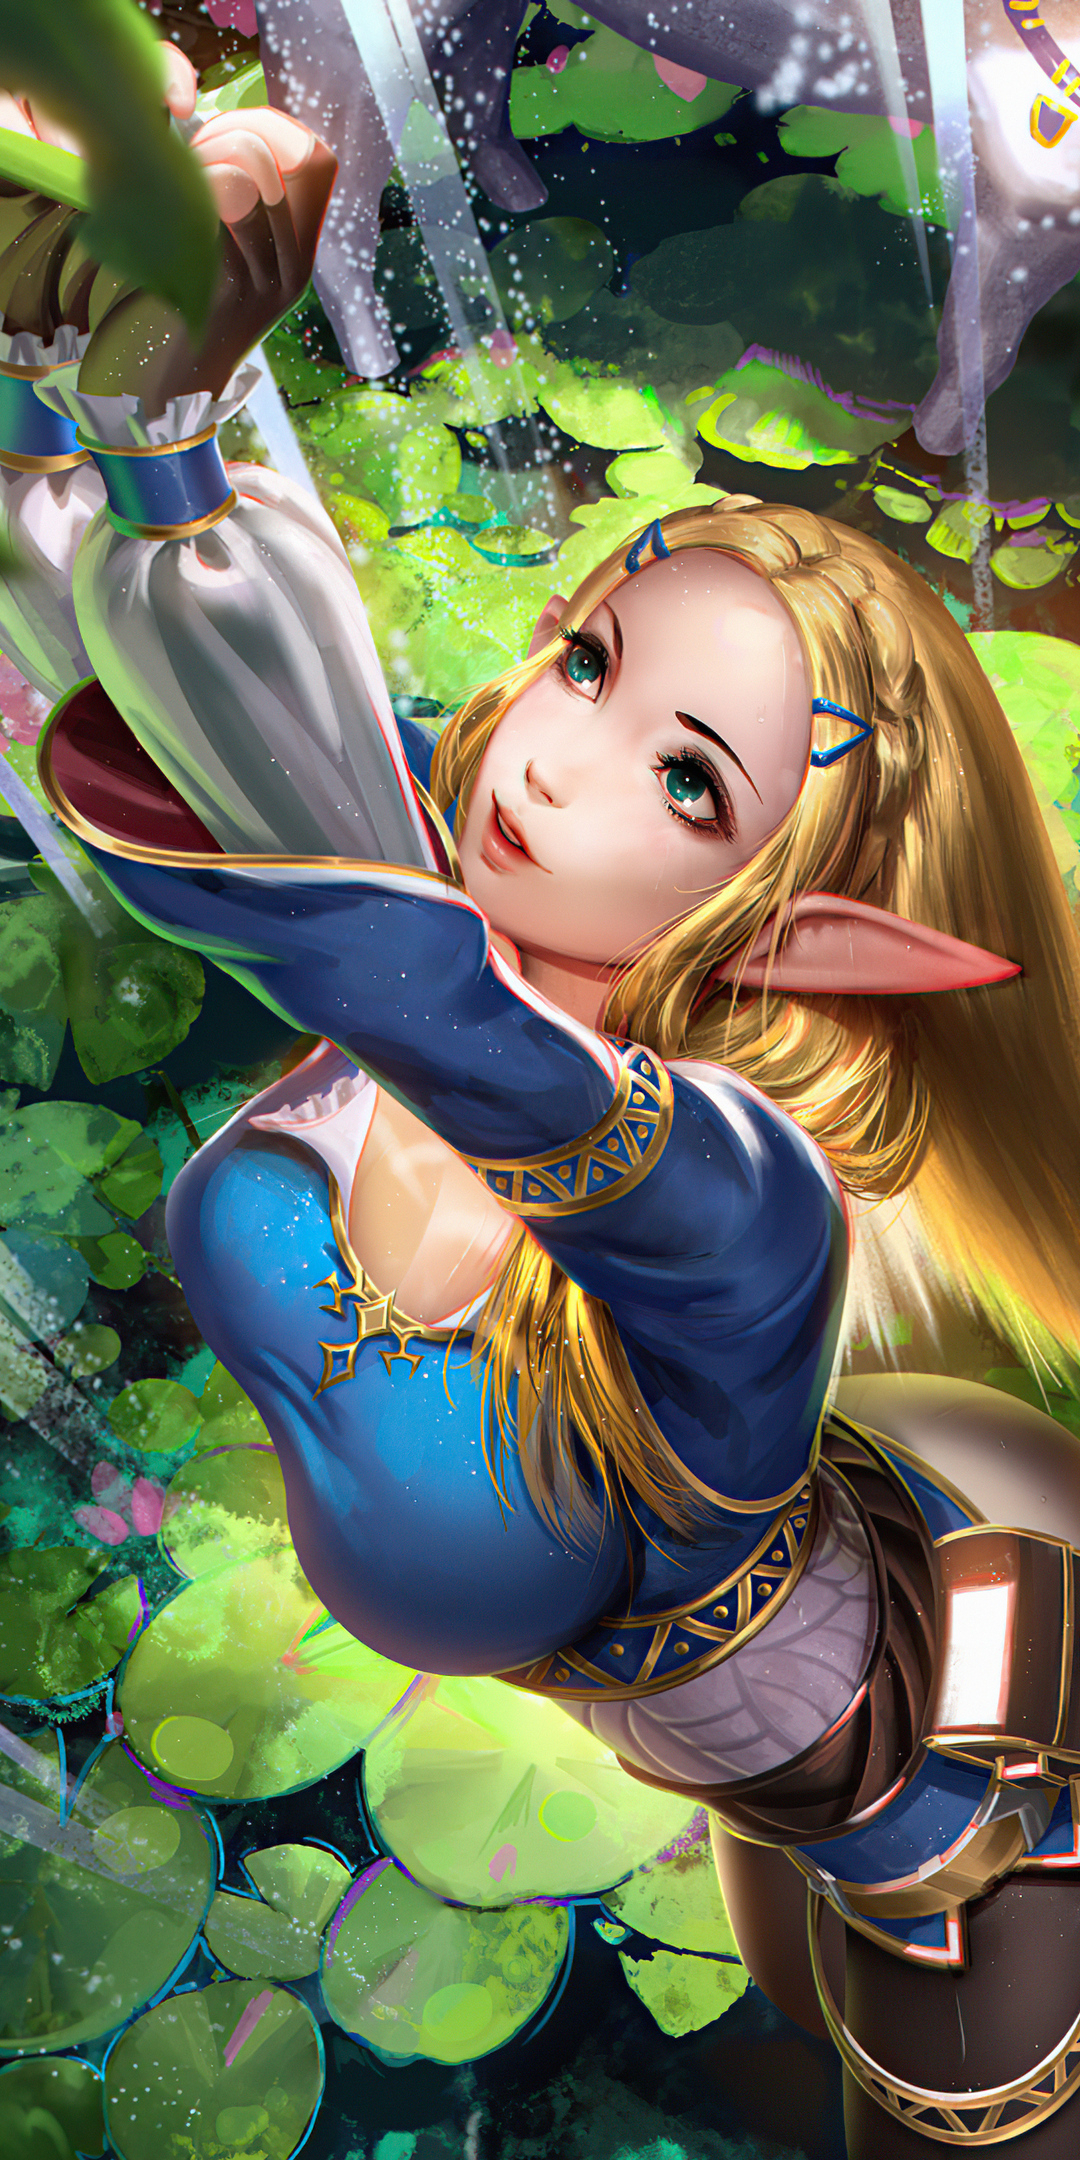 1080x2160 Princess Zelda 4k One Plus 5T,Honor 7x,Honor view 10,Lg Q6 HD 4k Wallpapers, Images, Backgrounds, Photos and Pictures